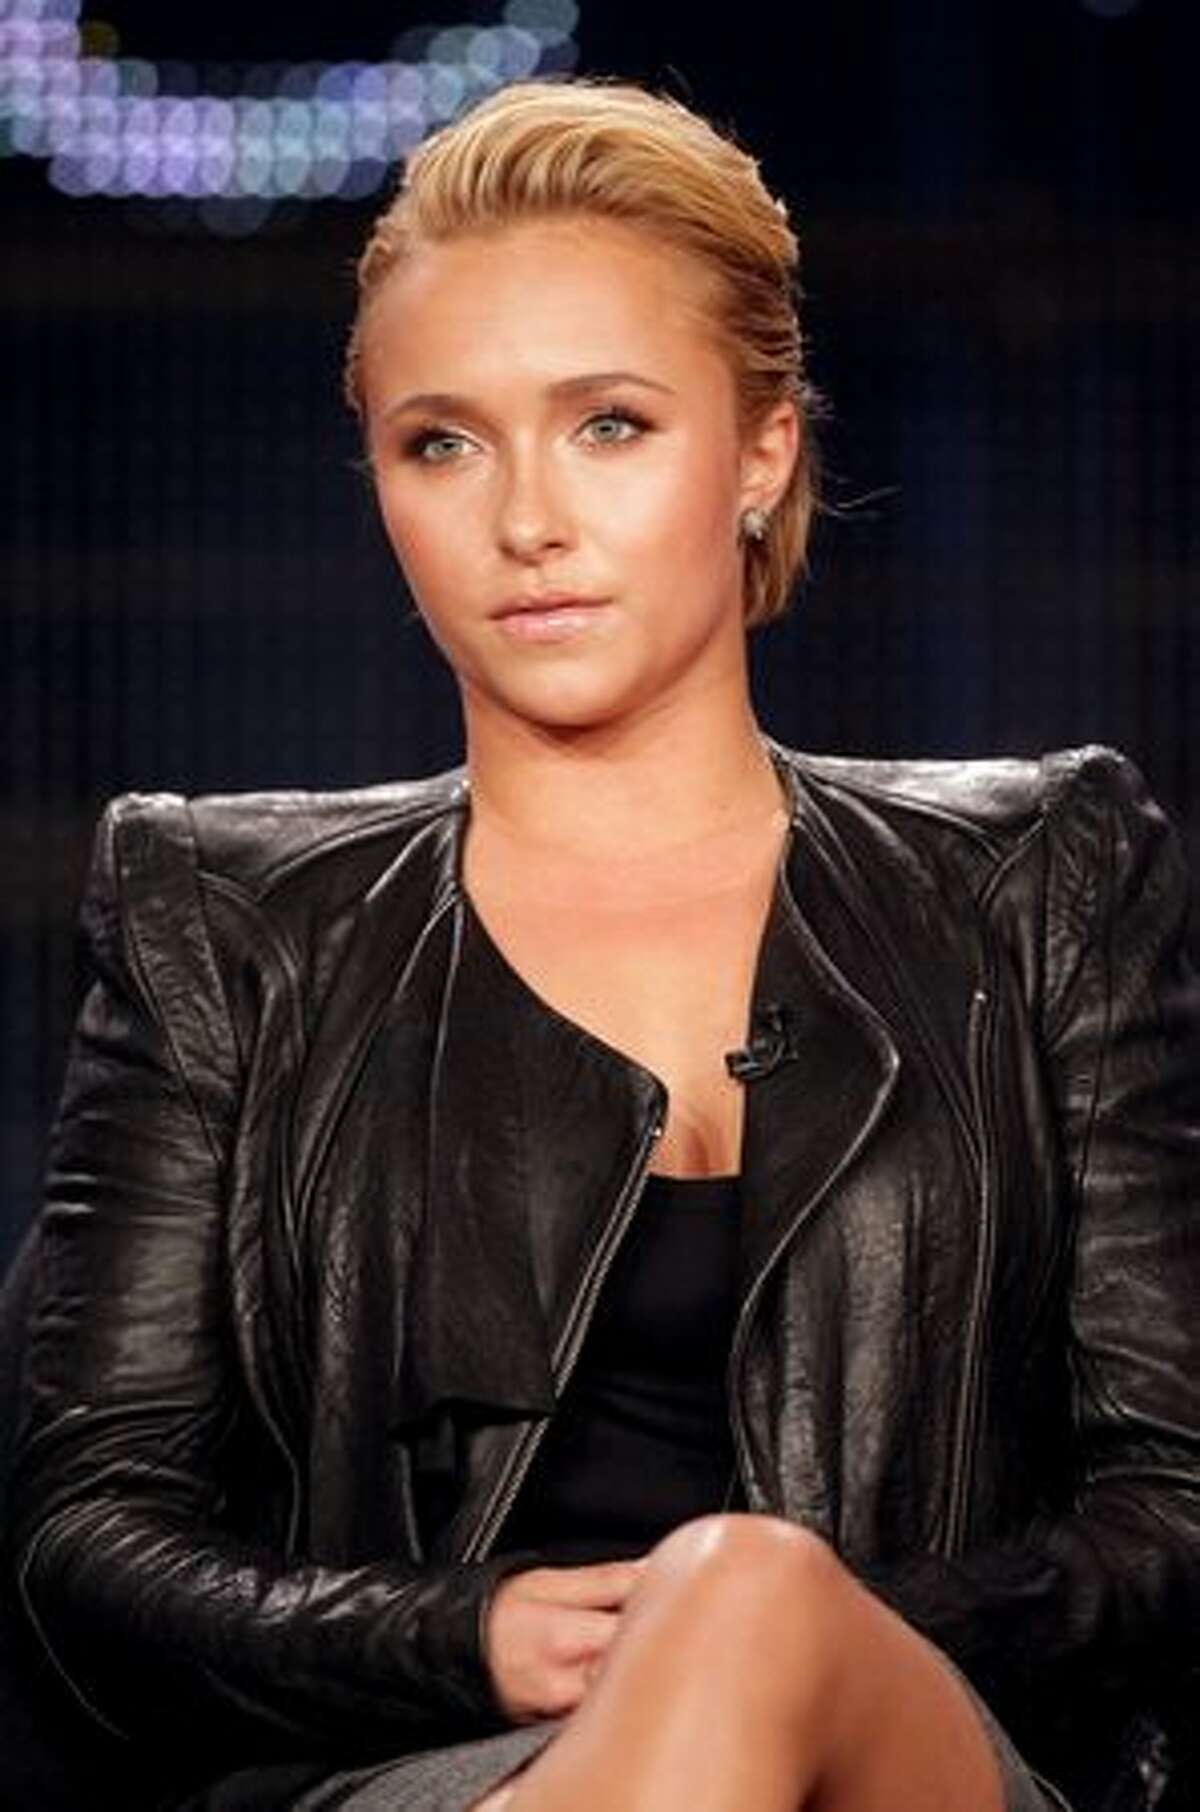 Actor Hayden Panettiere speaks during the "The Amanda Knox Story" panel at the Lifetime Television portion of the 2011 Winter TCA press tour held at the Langham Hotel in Pasadena, Calif., on Friday, Jan. 7, 2011.